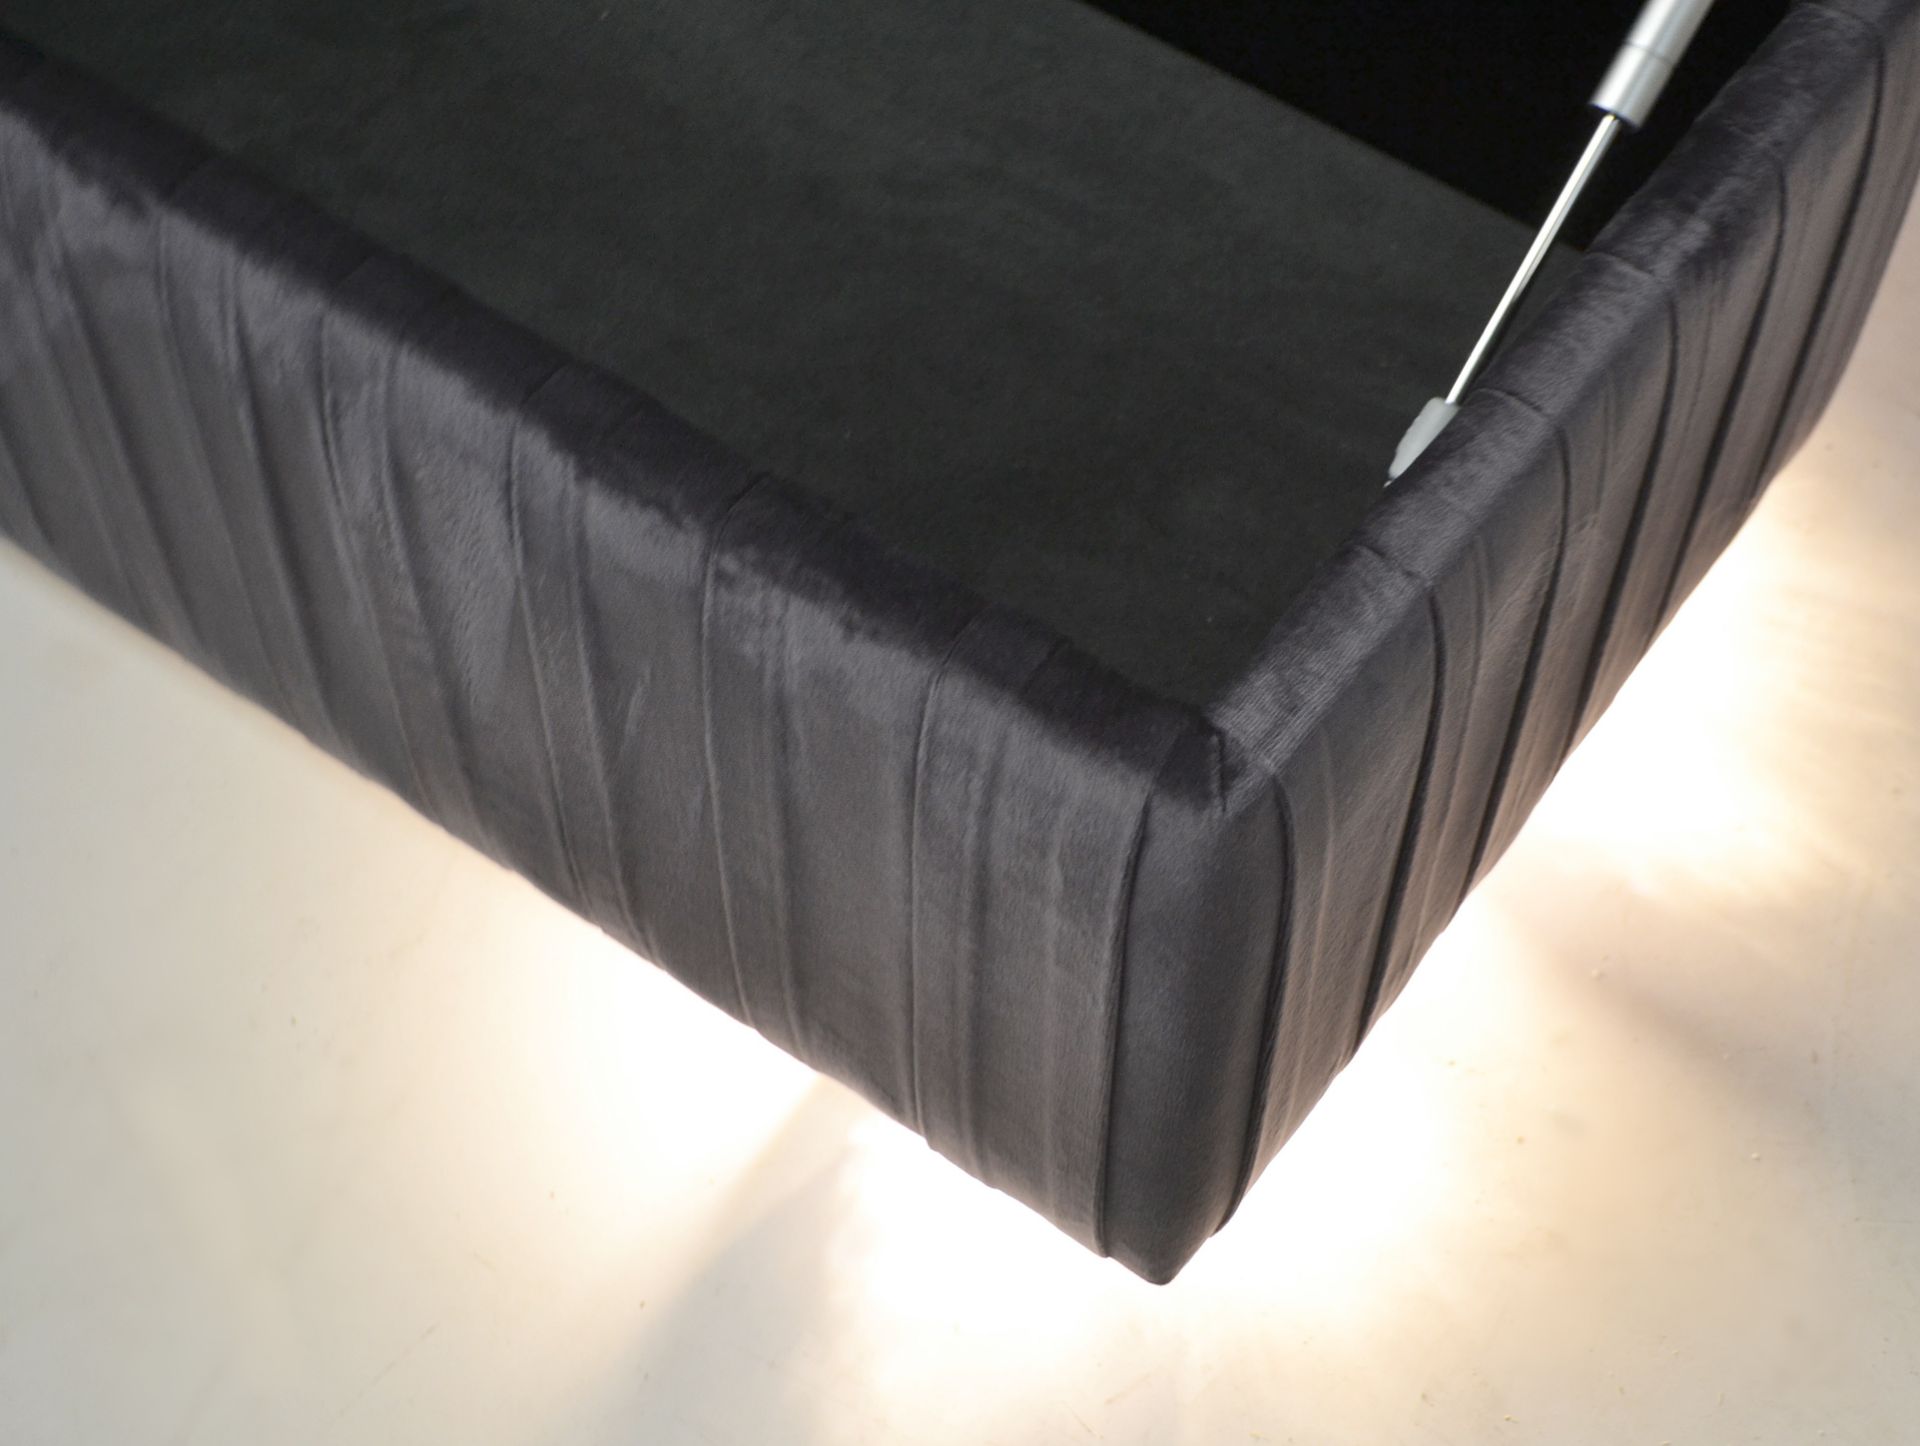 1 x REFLEX 'Plisse' Pleated Ottoman / Bedroom Bench In Plum With 'Illuminated' Spherical Glass Feet - Image 5 of 11